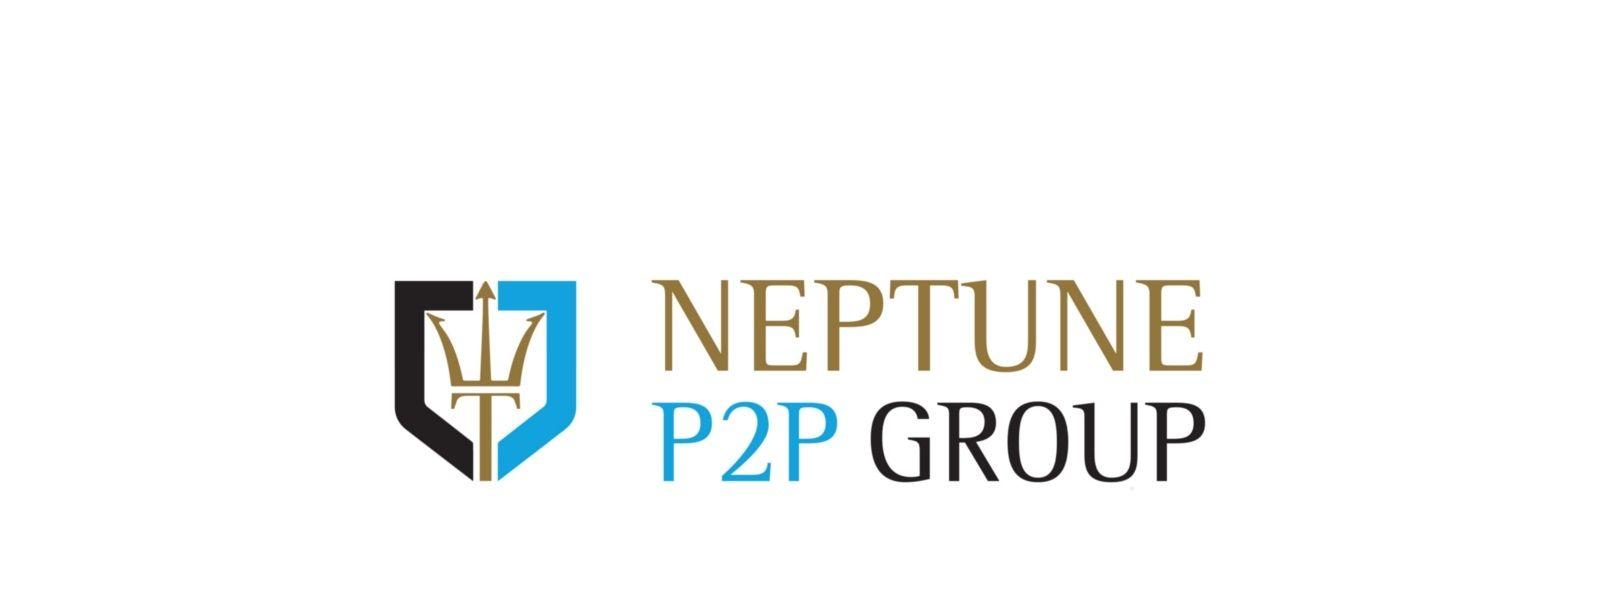 Neptune Logo - About Us - Neptune P2P Group